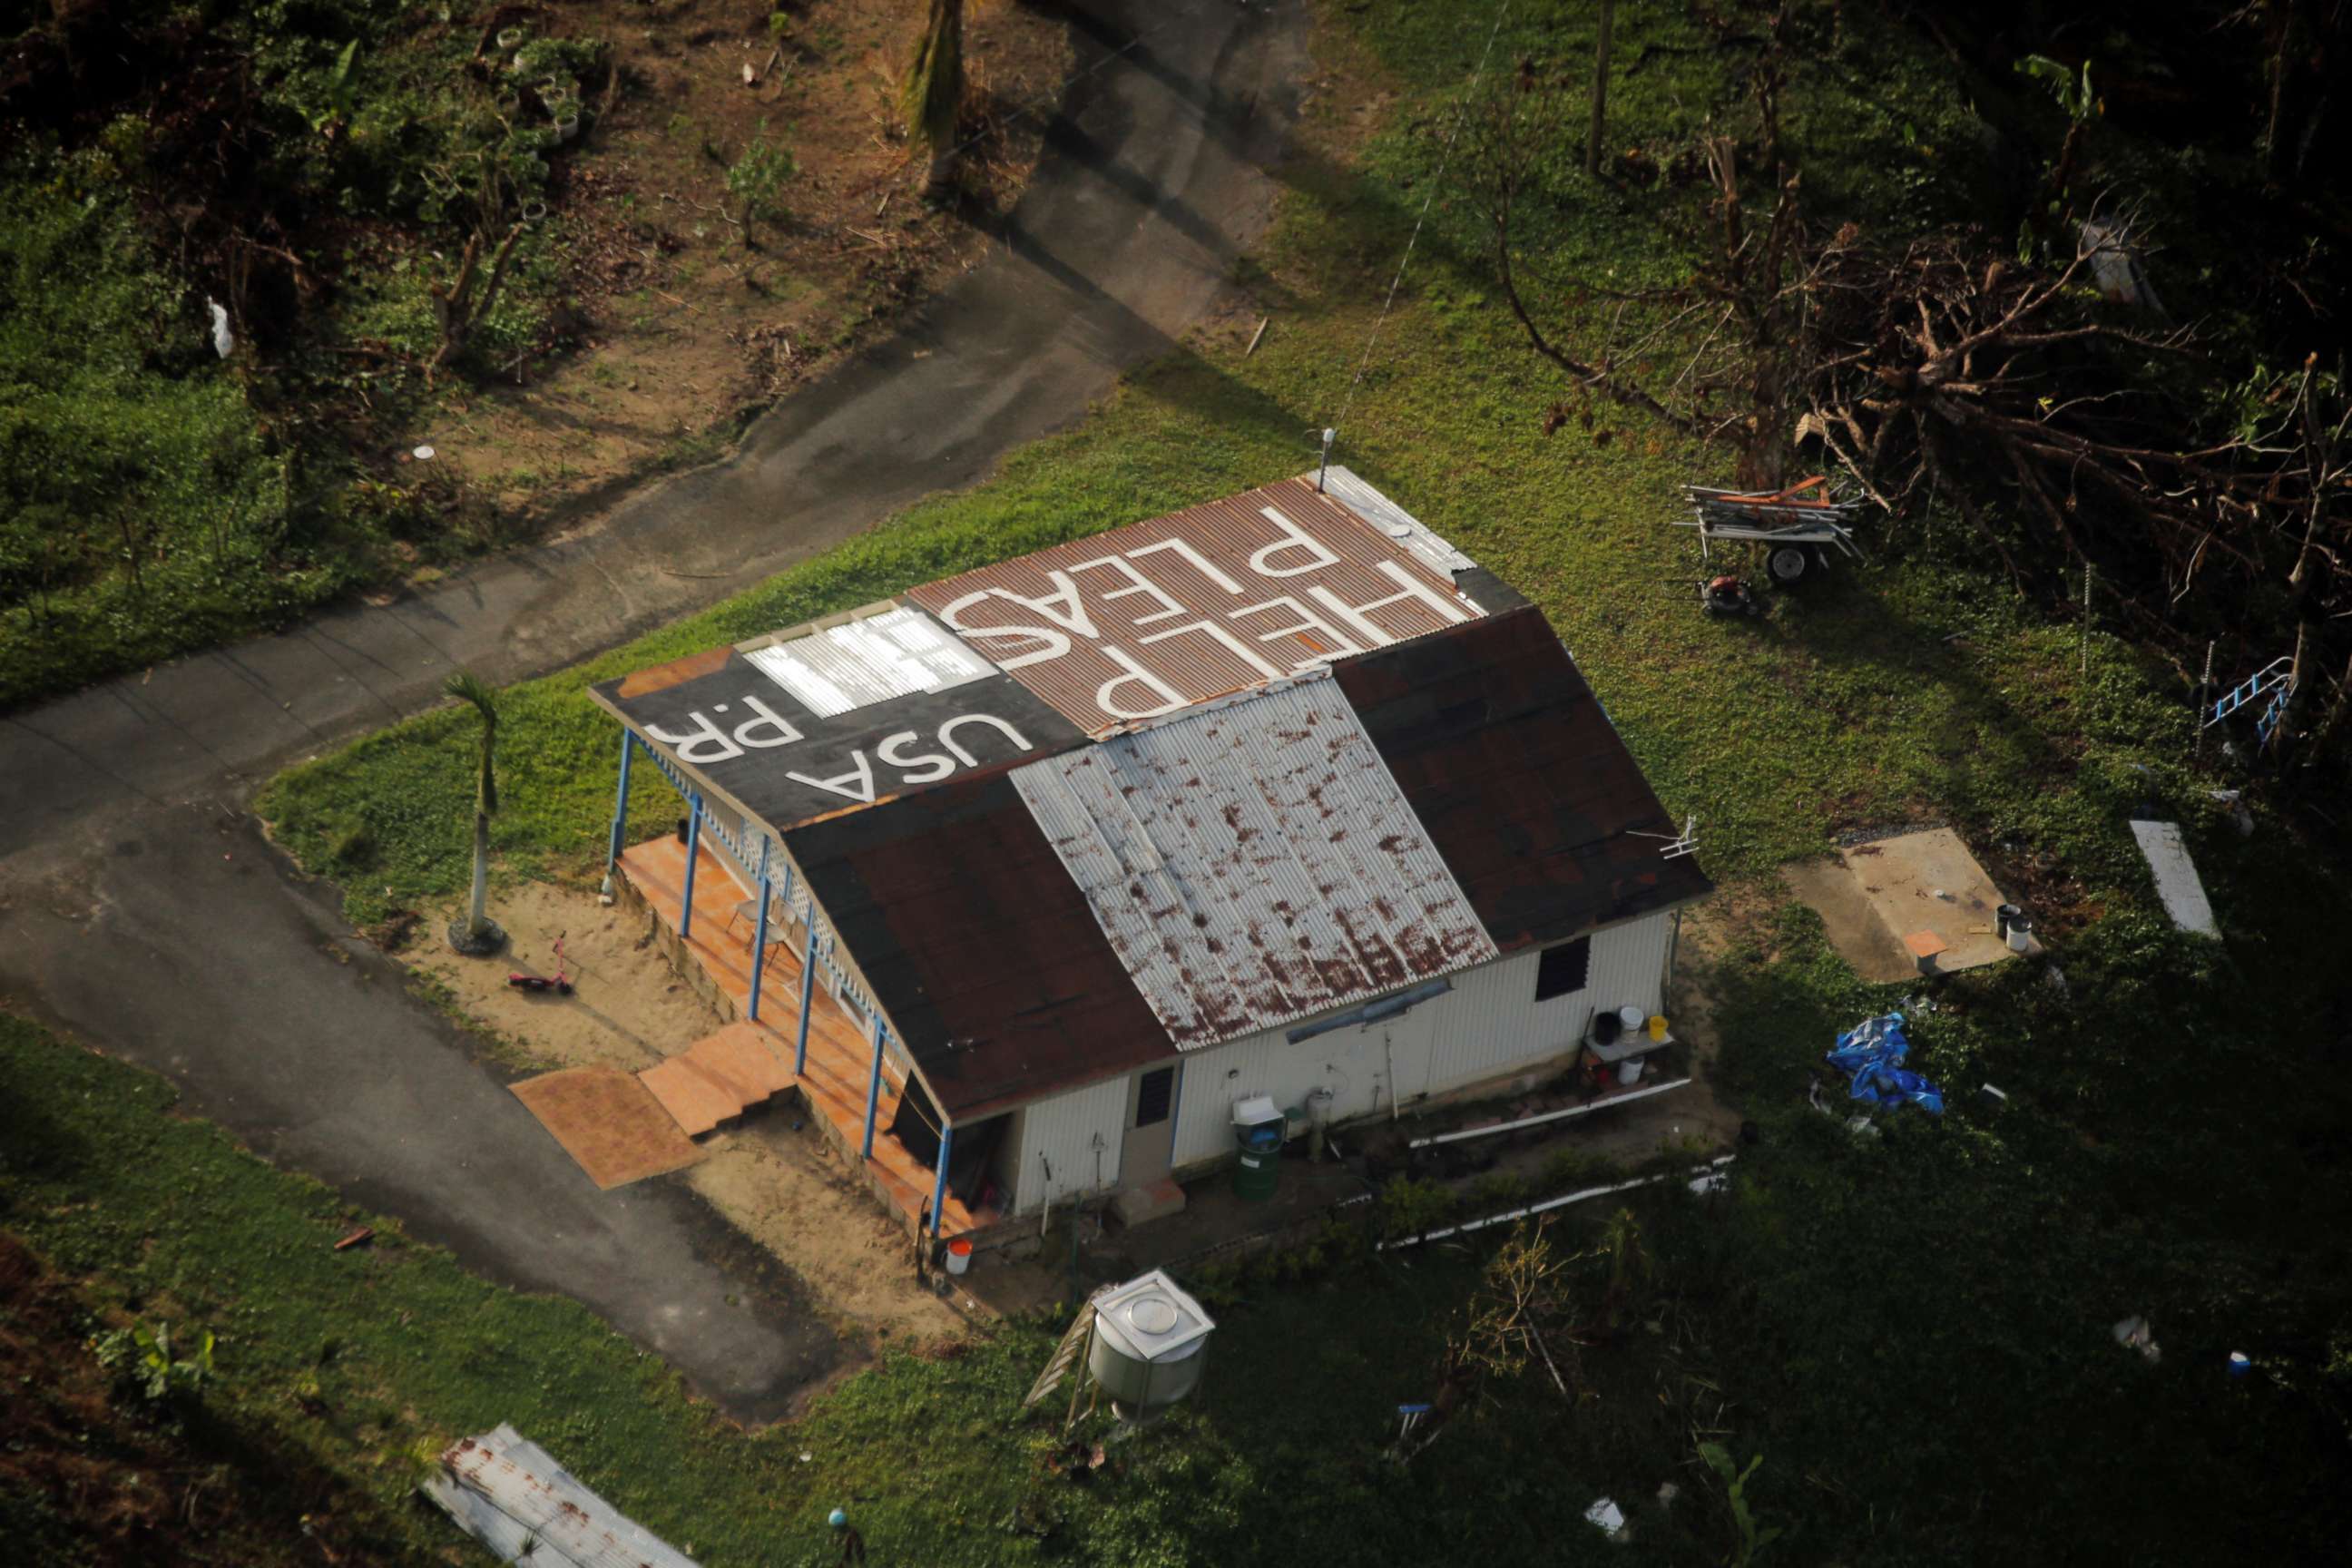 PHOTO: A message written on the rooftop is seen from the air during recovery efforts following Hurricane Maria near Humacao, Puerto Rico, Oct. 10, 2017.